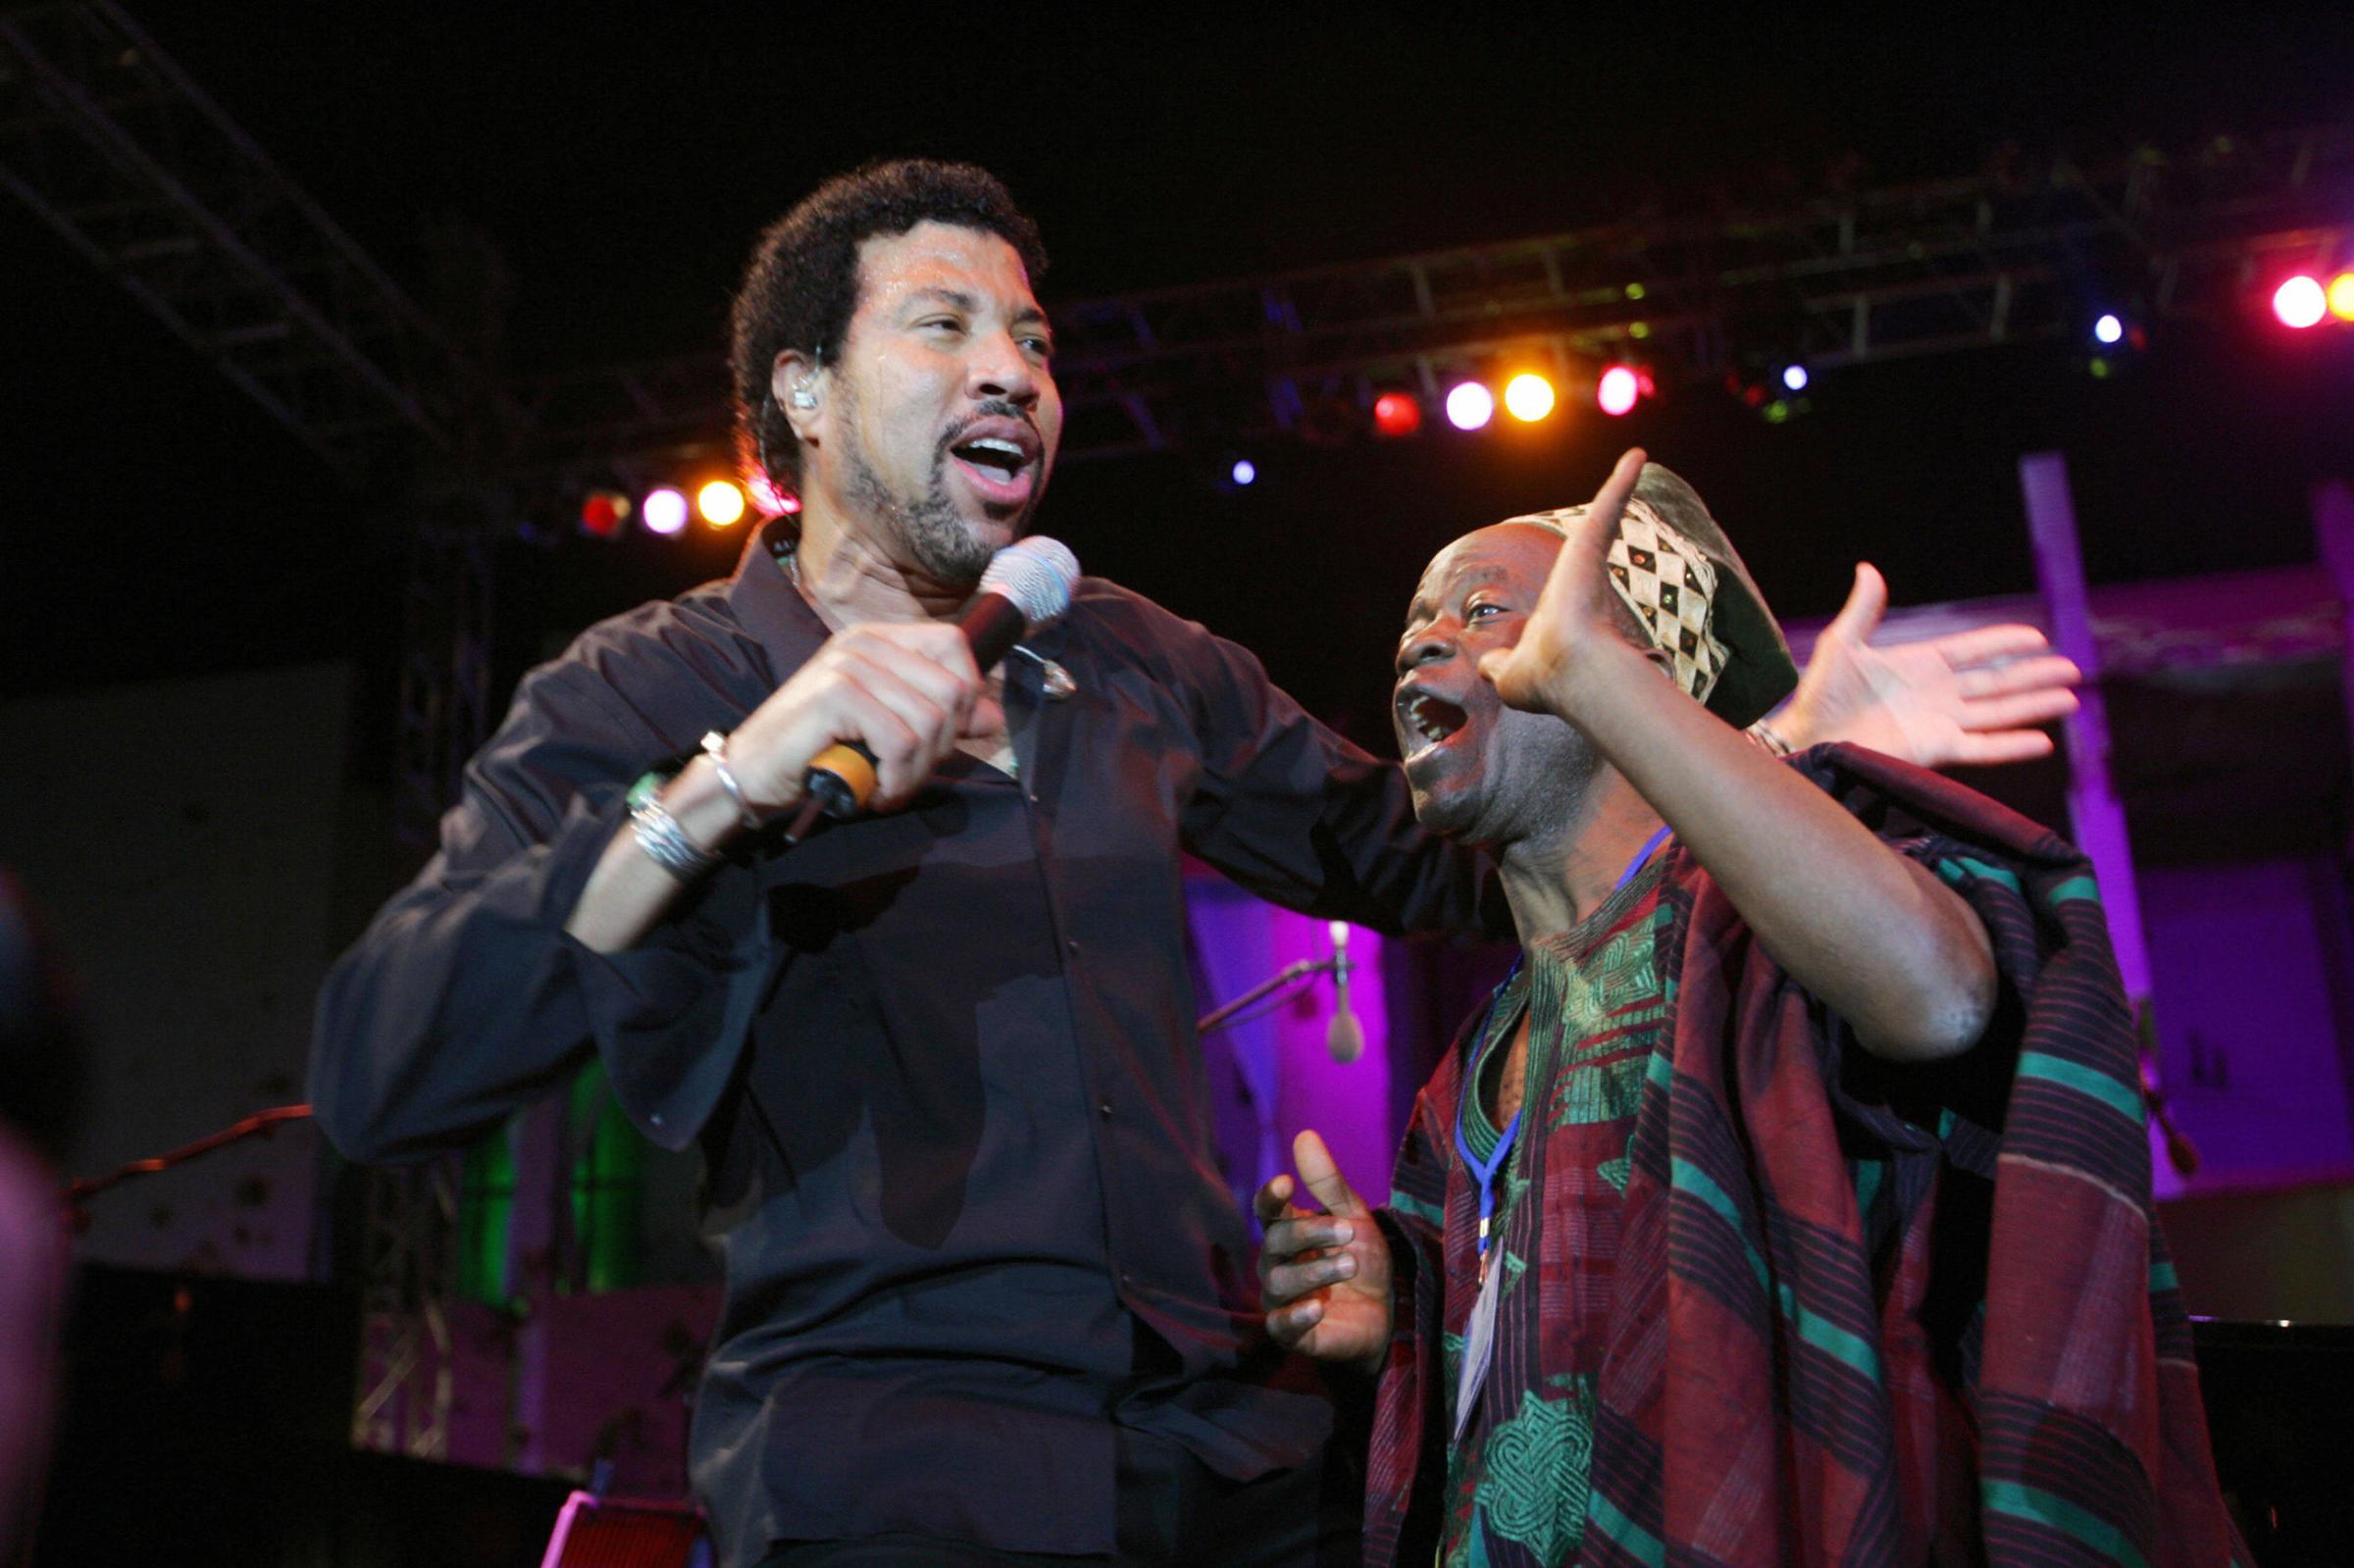 Lionel Richie performs with an unidentified Togolese man during a concert held in front of the house of Libyan leader Moamer Kadhafi in Tripoli on April 14, 2006.